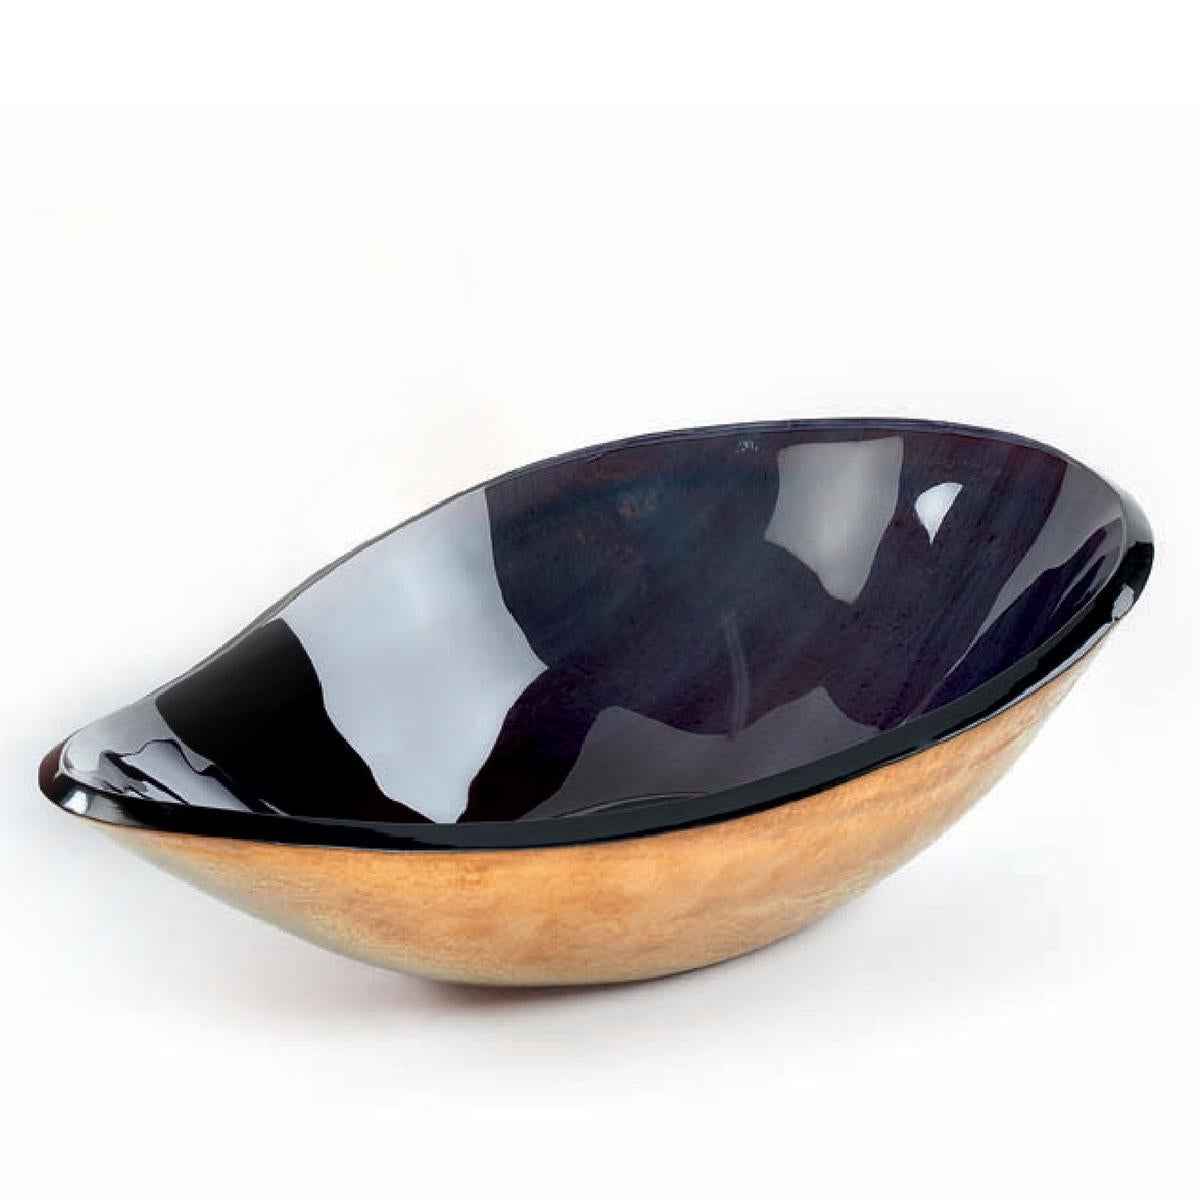 Bowl Coppola black bronze glass with all structure
in blown glass in blackened finish inside and in bronze
finish outside.